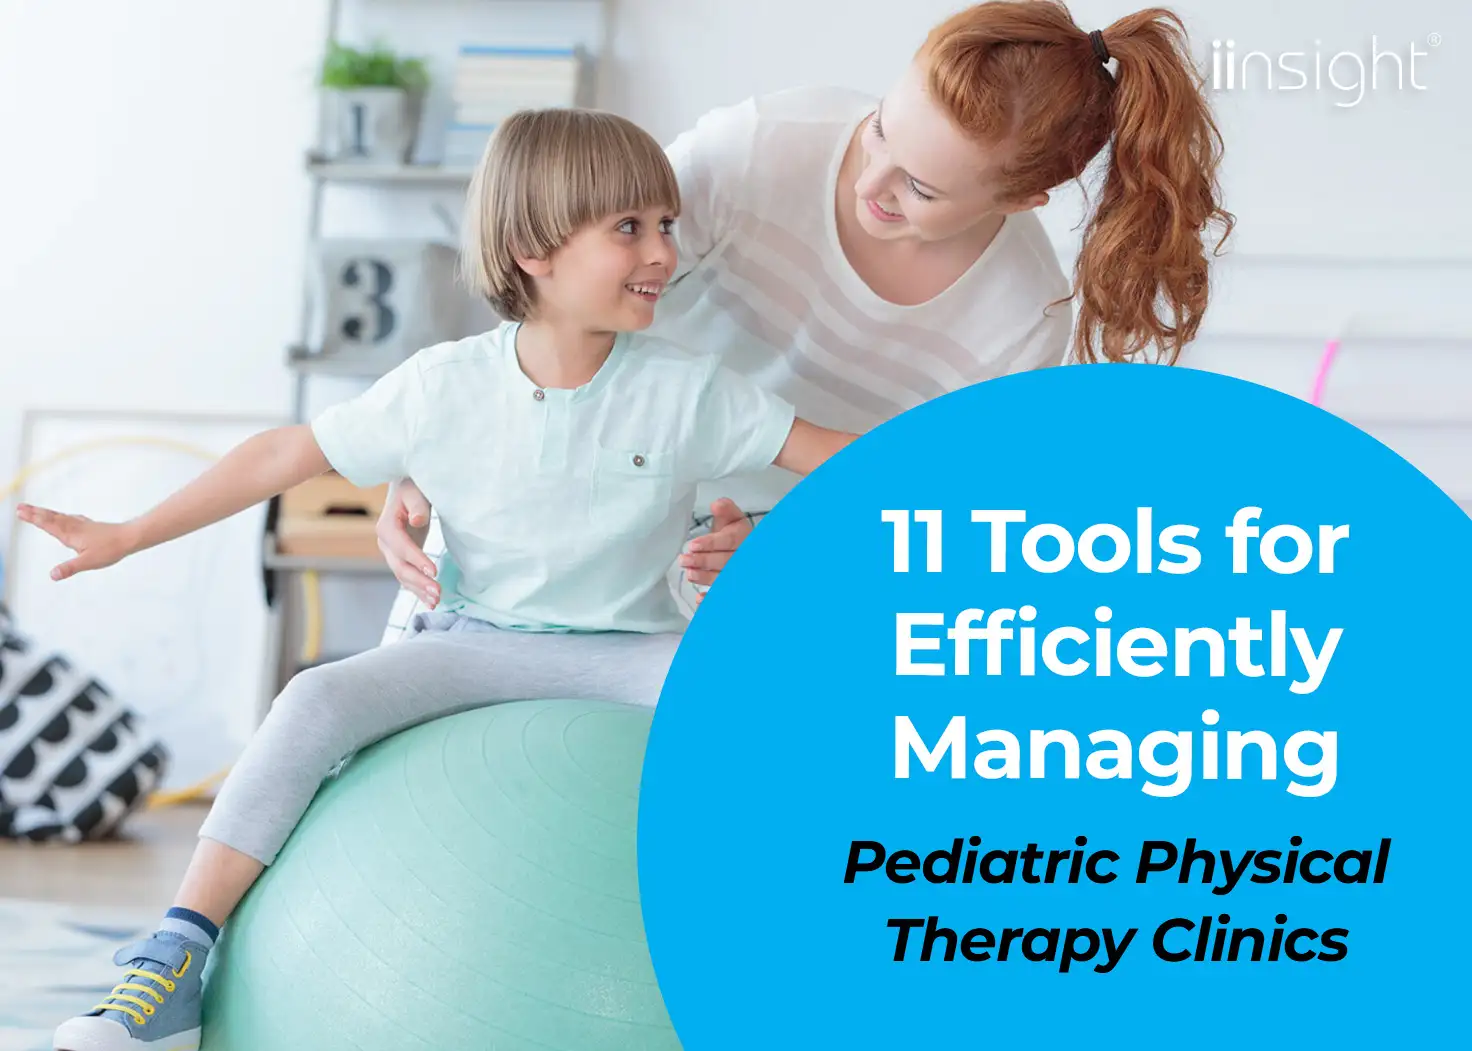 11 Tools for Efficiently Managing Pediatric Physical Therapy Clinics